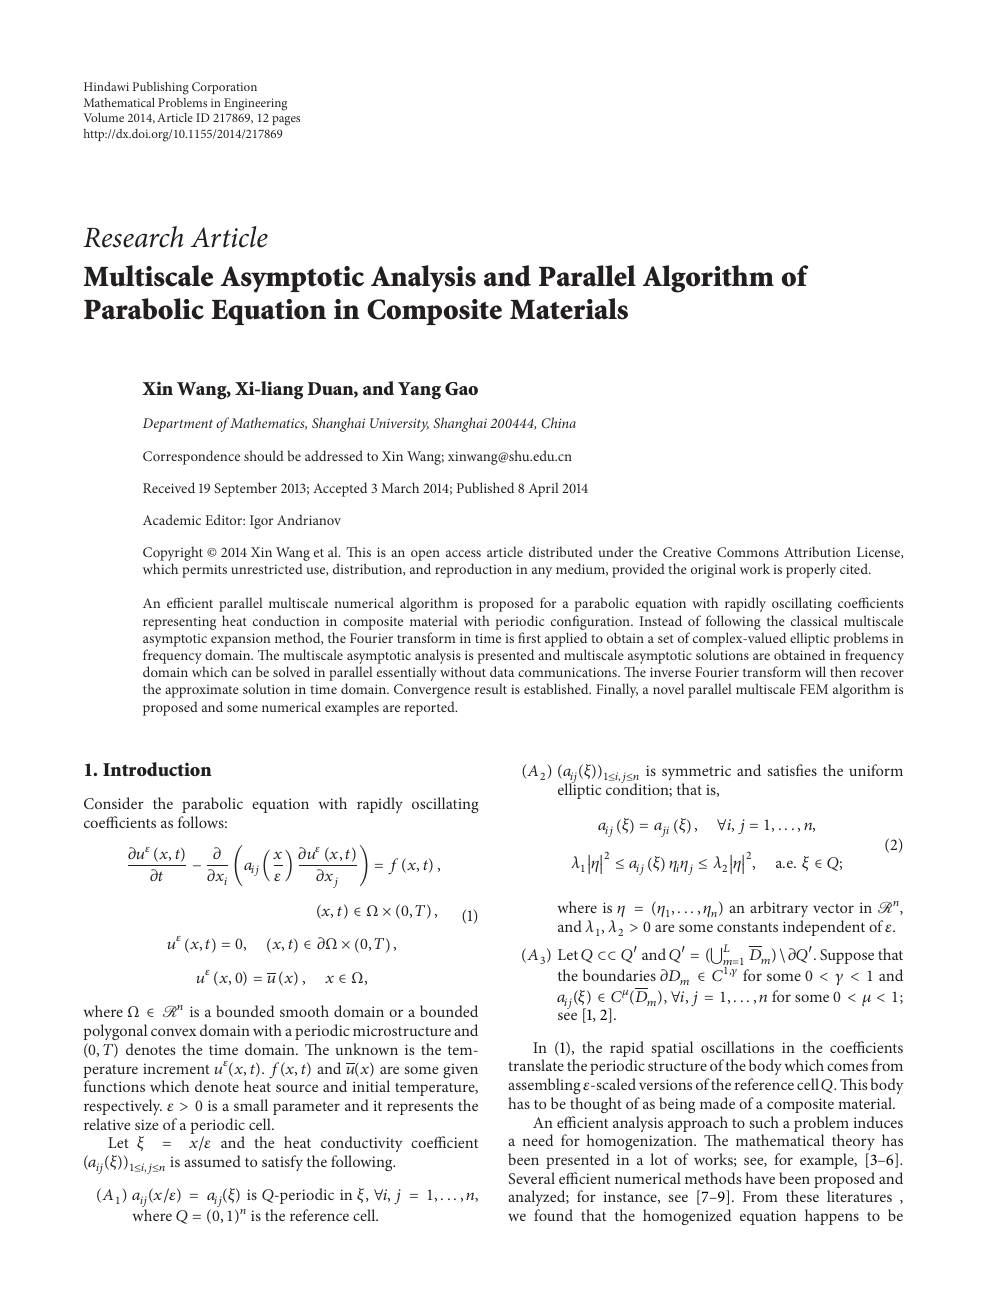 Multiscale Asymptotic Analysis And Parallel Algorithm Of Parabolic Equation In Composite Materials Topic Of Research Paper In Mathematics Download Scholarly Article Pdf And Read For Free On Cyberleninka Open Science Hub